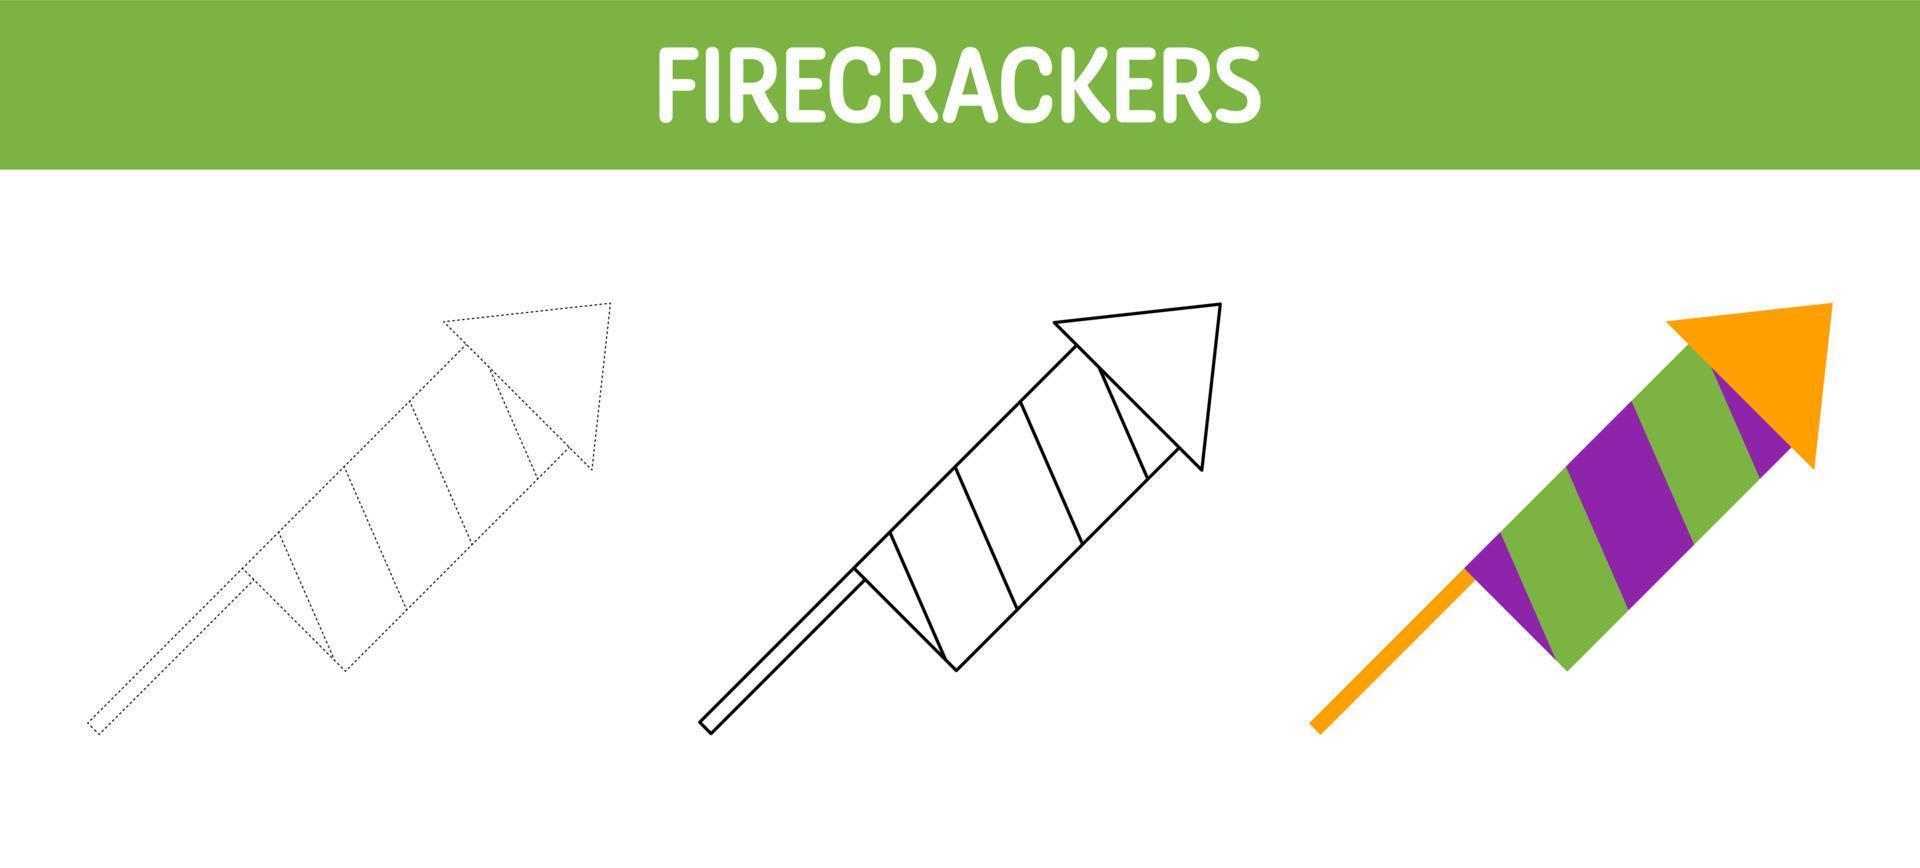 Firecrackers tracing and coloring worksheet for kids vector